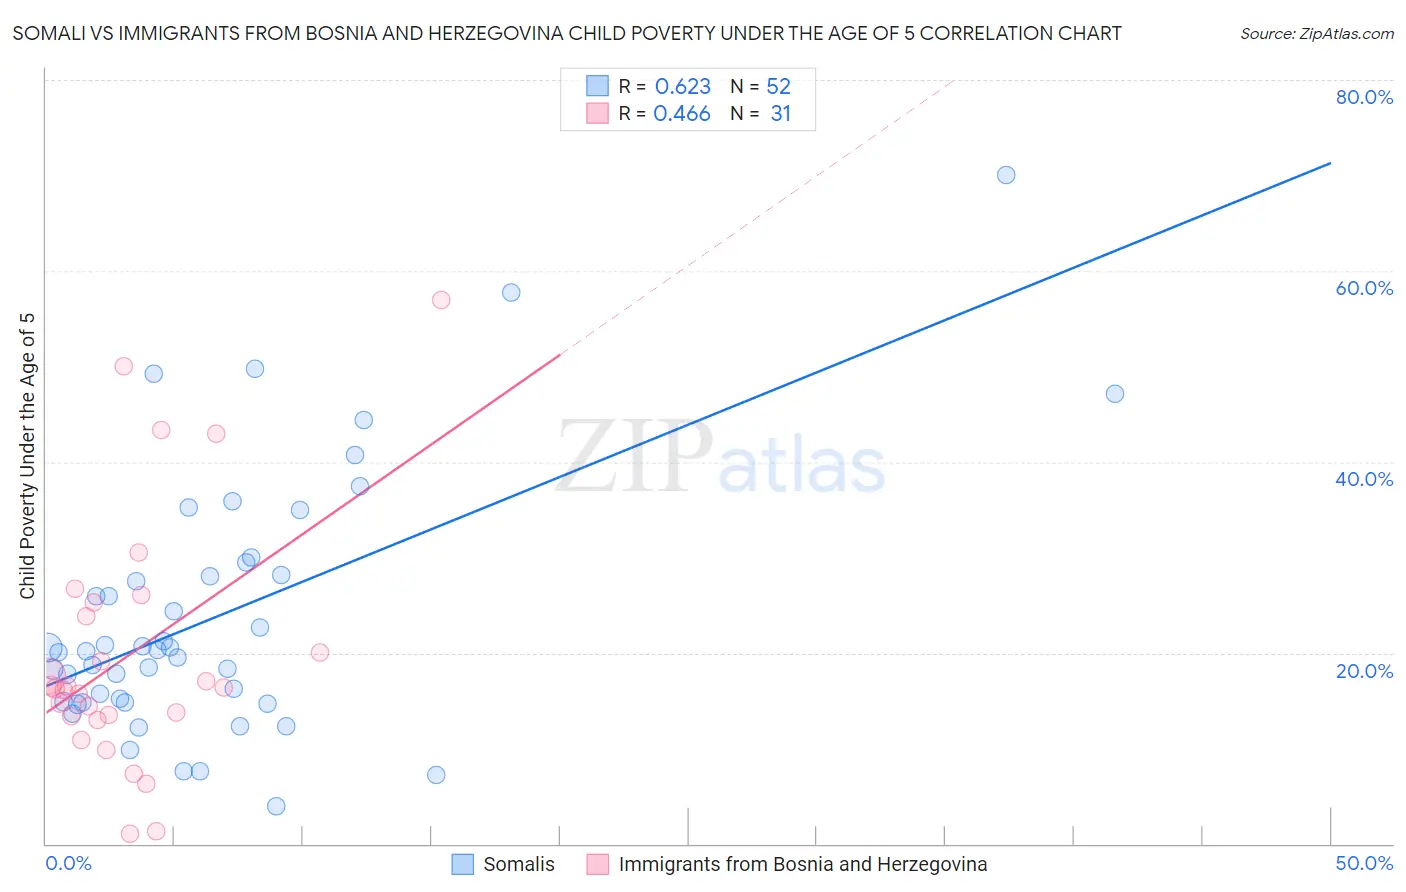 Somali vs Immigrants from Bosnia and Herzegovina Child Poverty Under the Age of 5